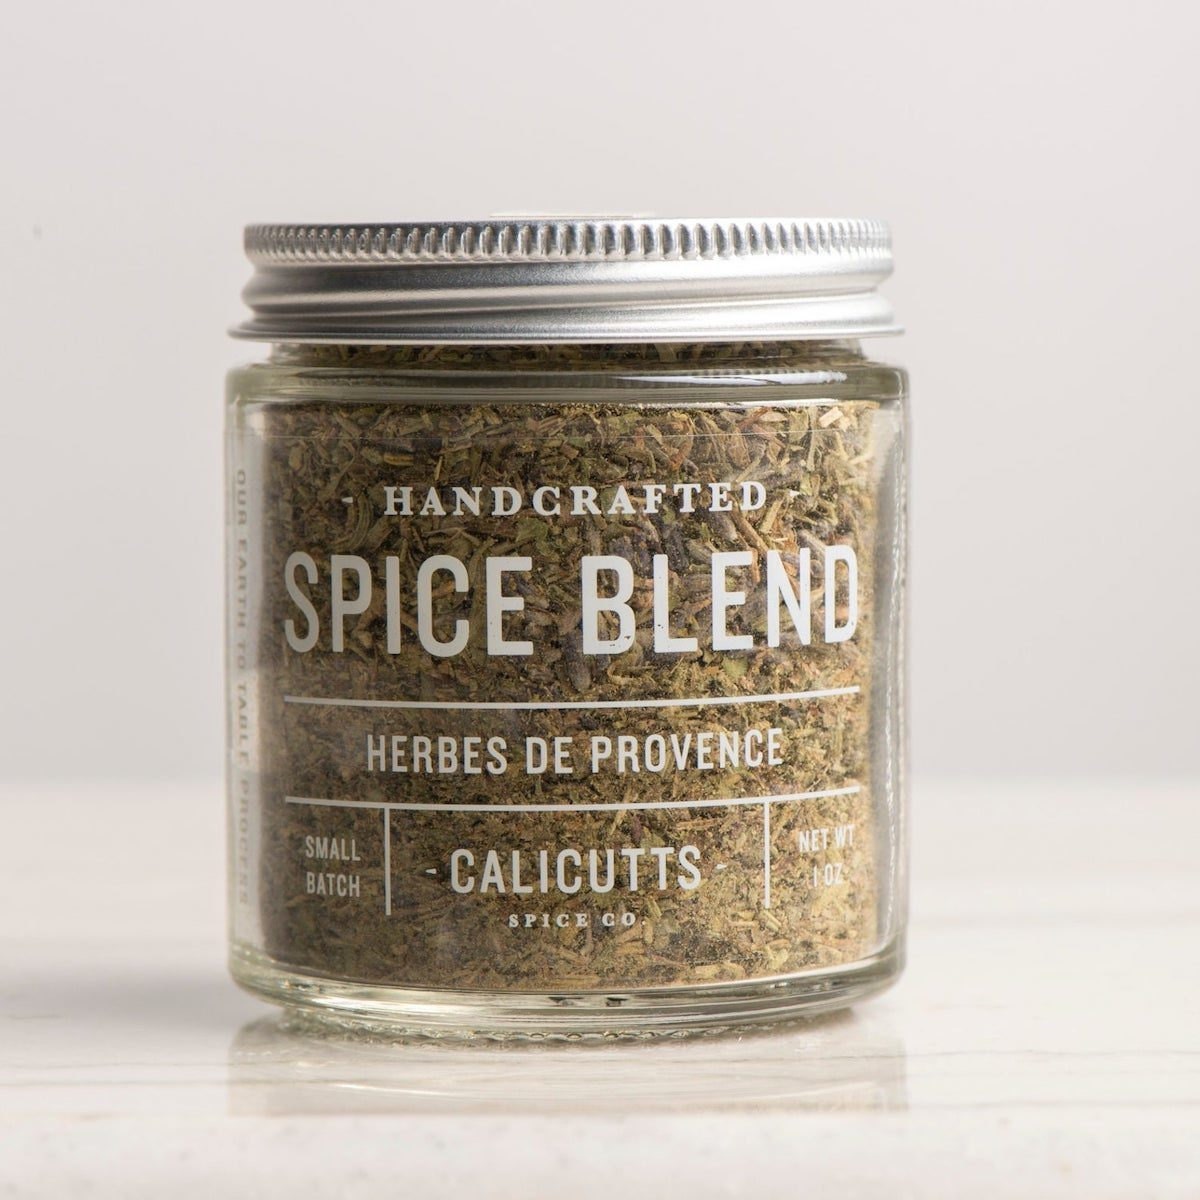 Herbes de Provence from Calicutts Spice Co.